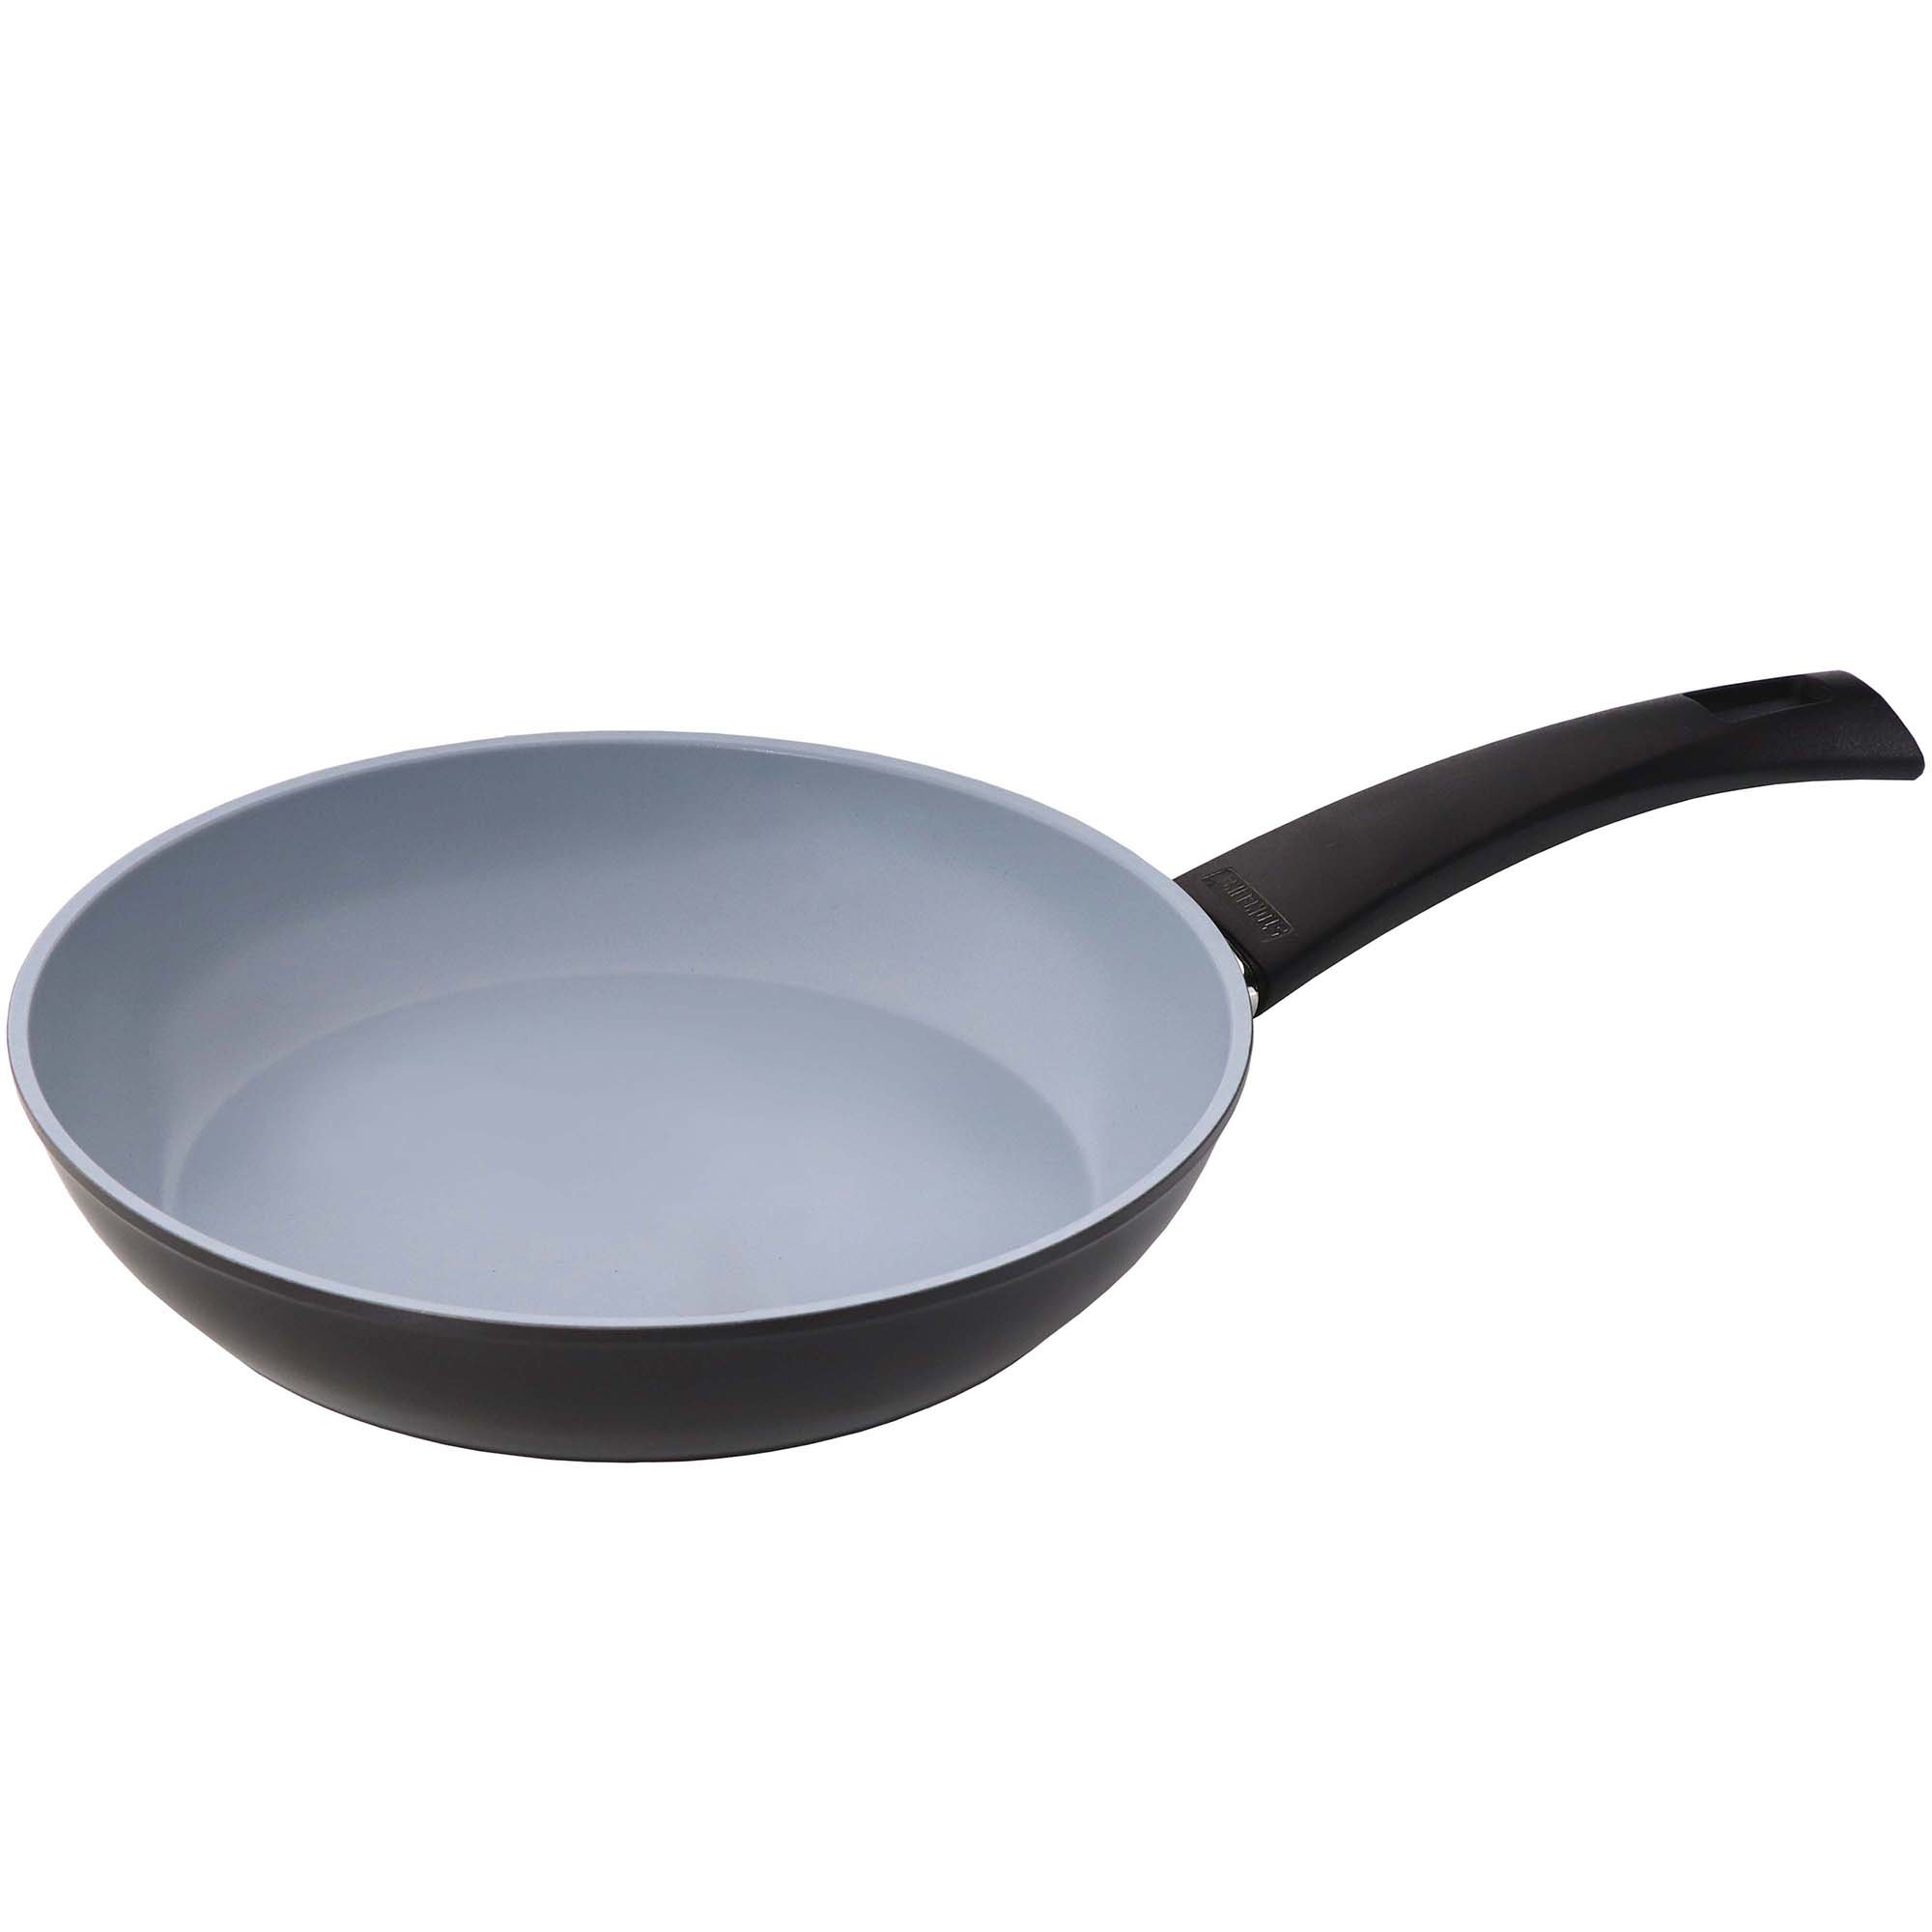 Natural Line® frying pan 24 cm, ceramic coating, induction and oven-safe